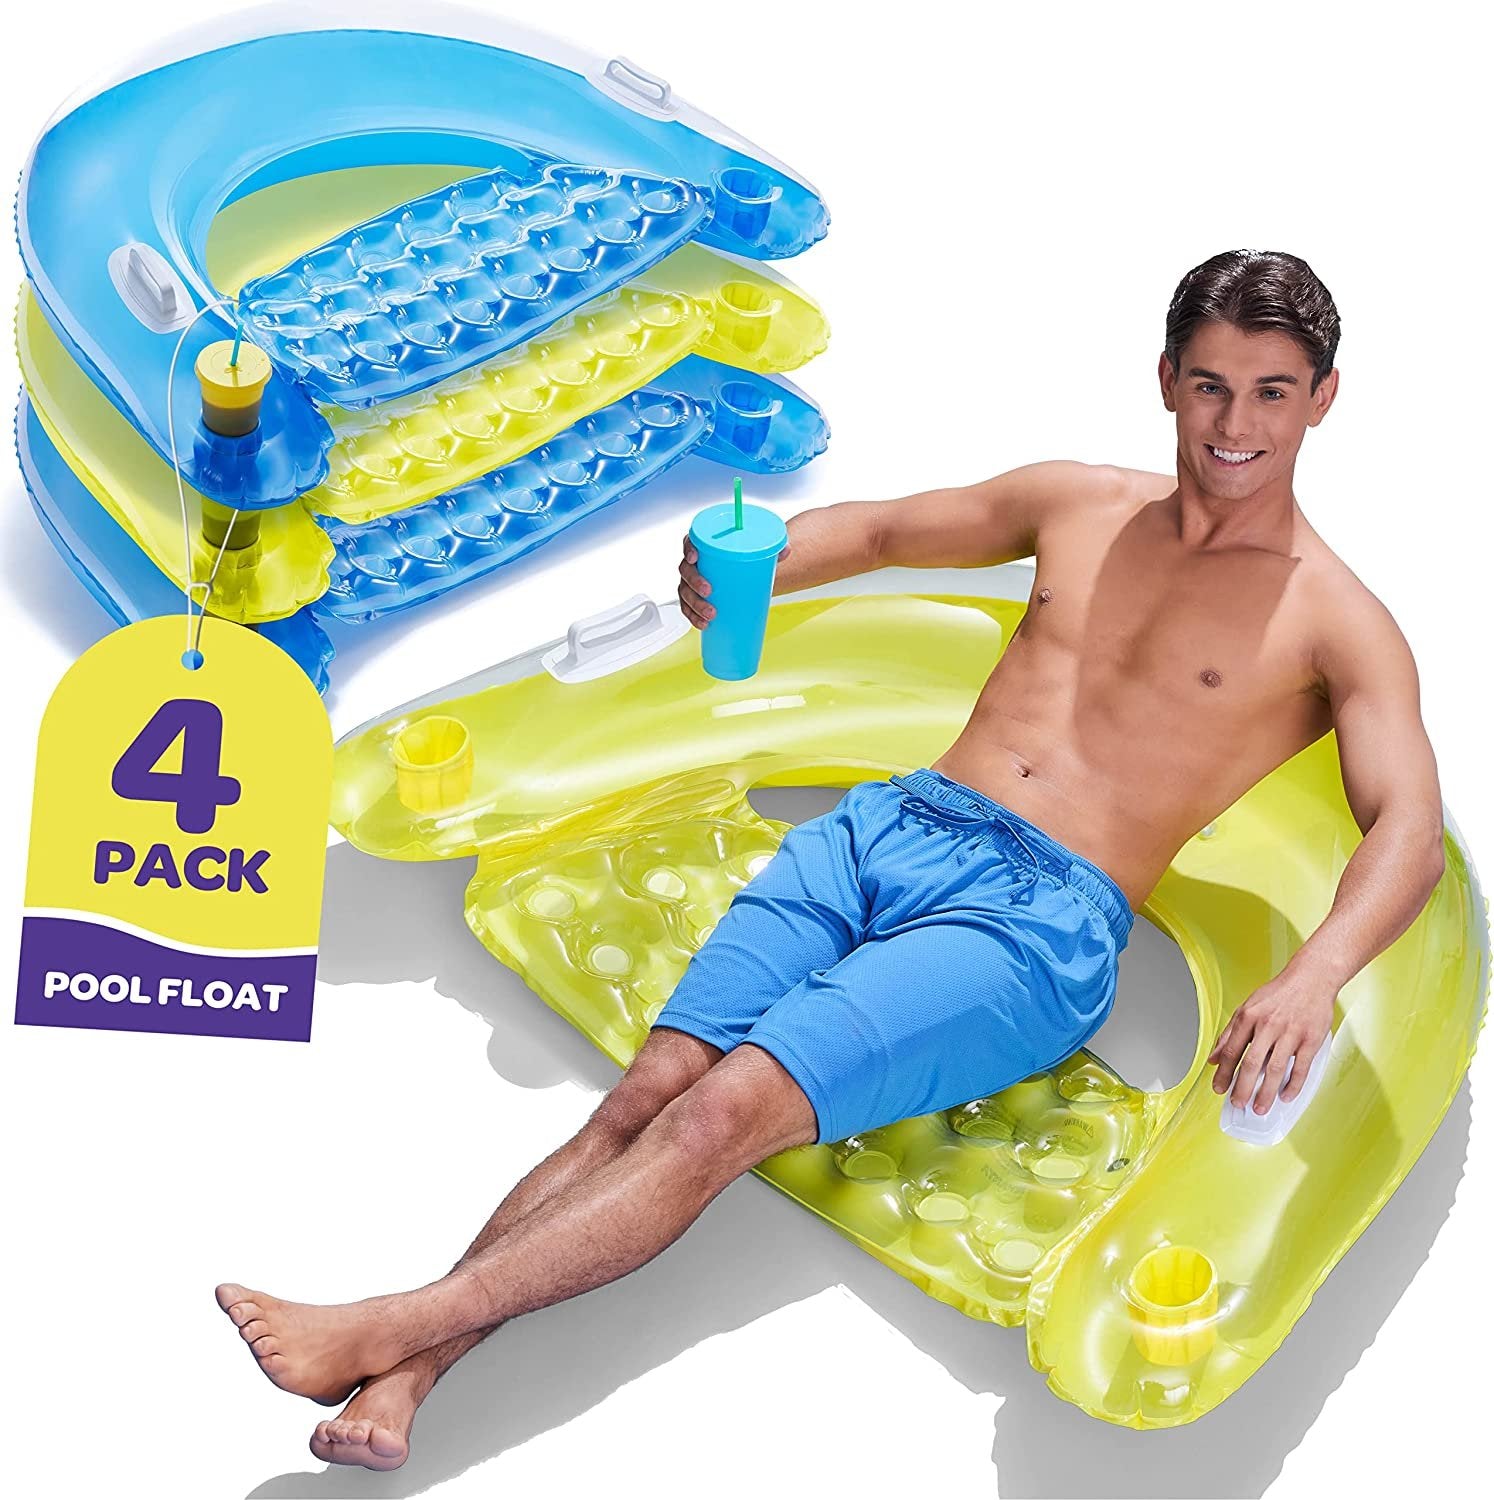 Pool Floats Adult Inflatable Chair Floats with Cup Holders & Handles - Happy Colorful Pool Floaties - Pool Float Comes in 2 Fun Colors, Blue & Yellow,